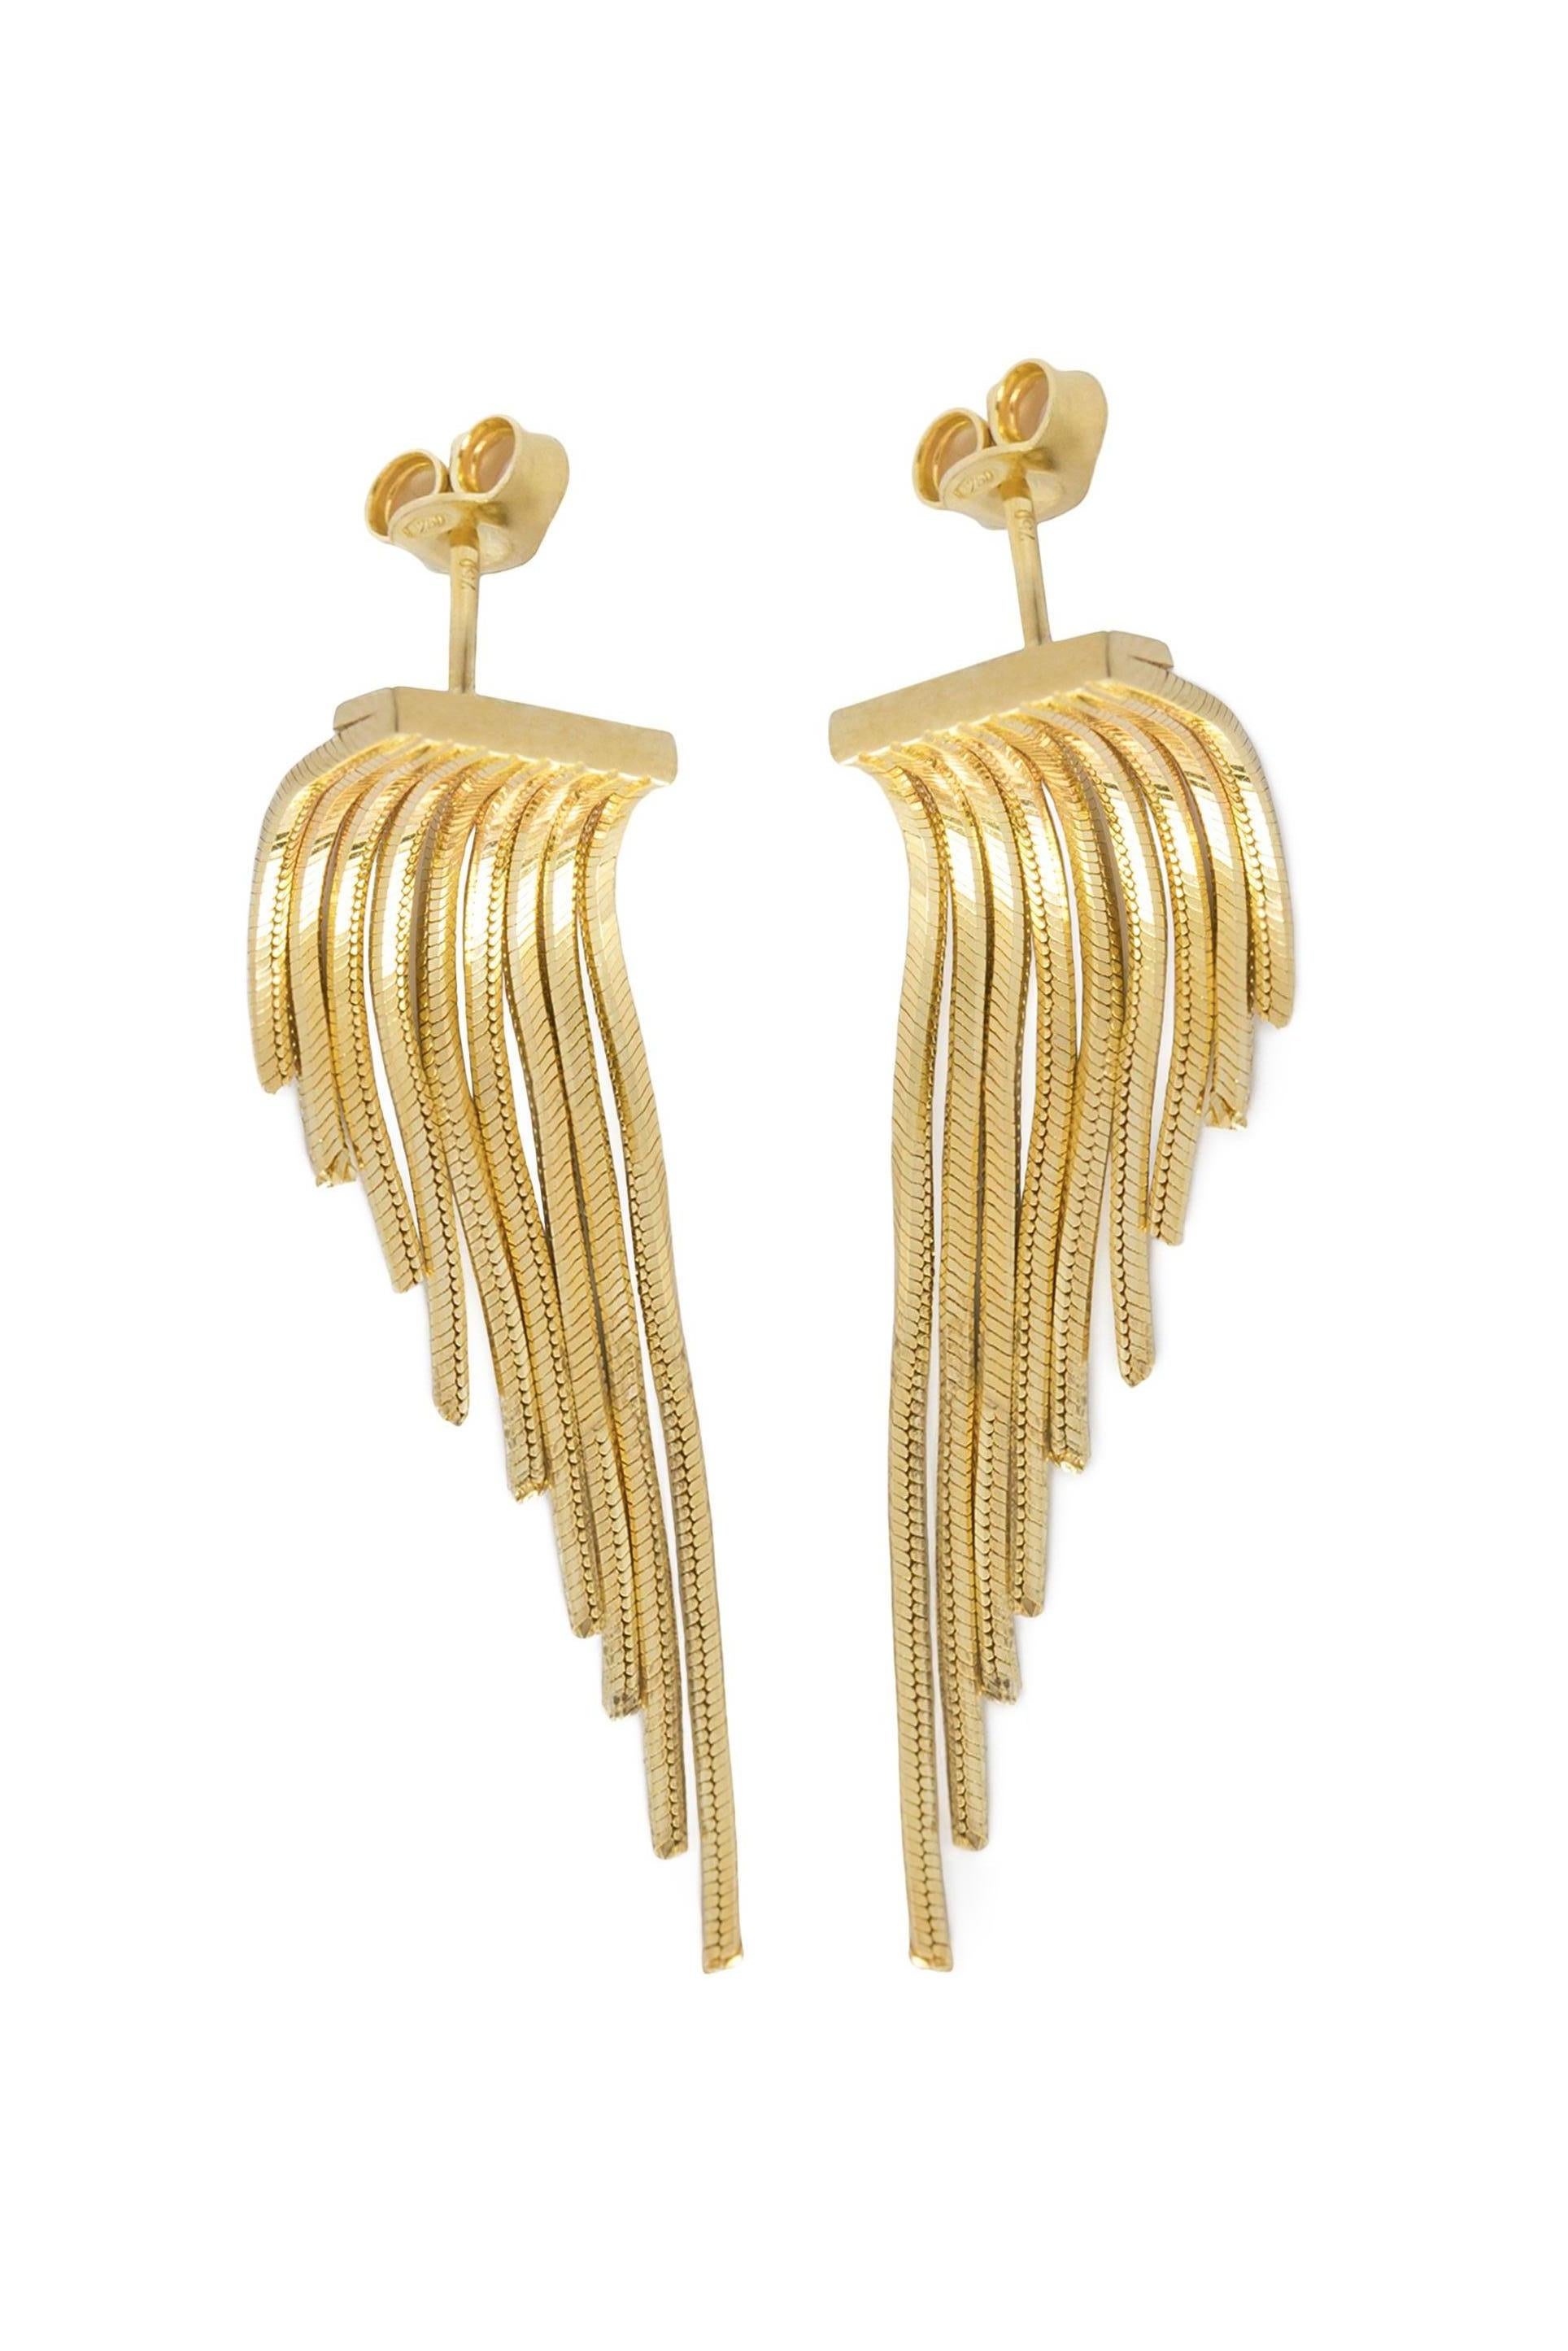 Contemporary Dangling Fringed Earring Pair in 18 Carat Gold from Iosselliani For Sale